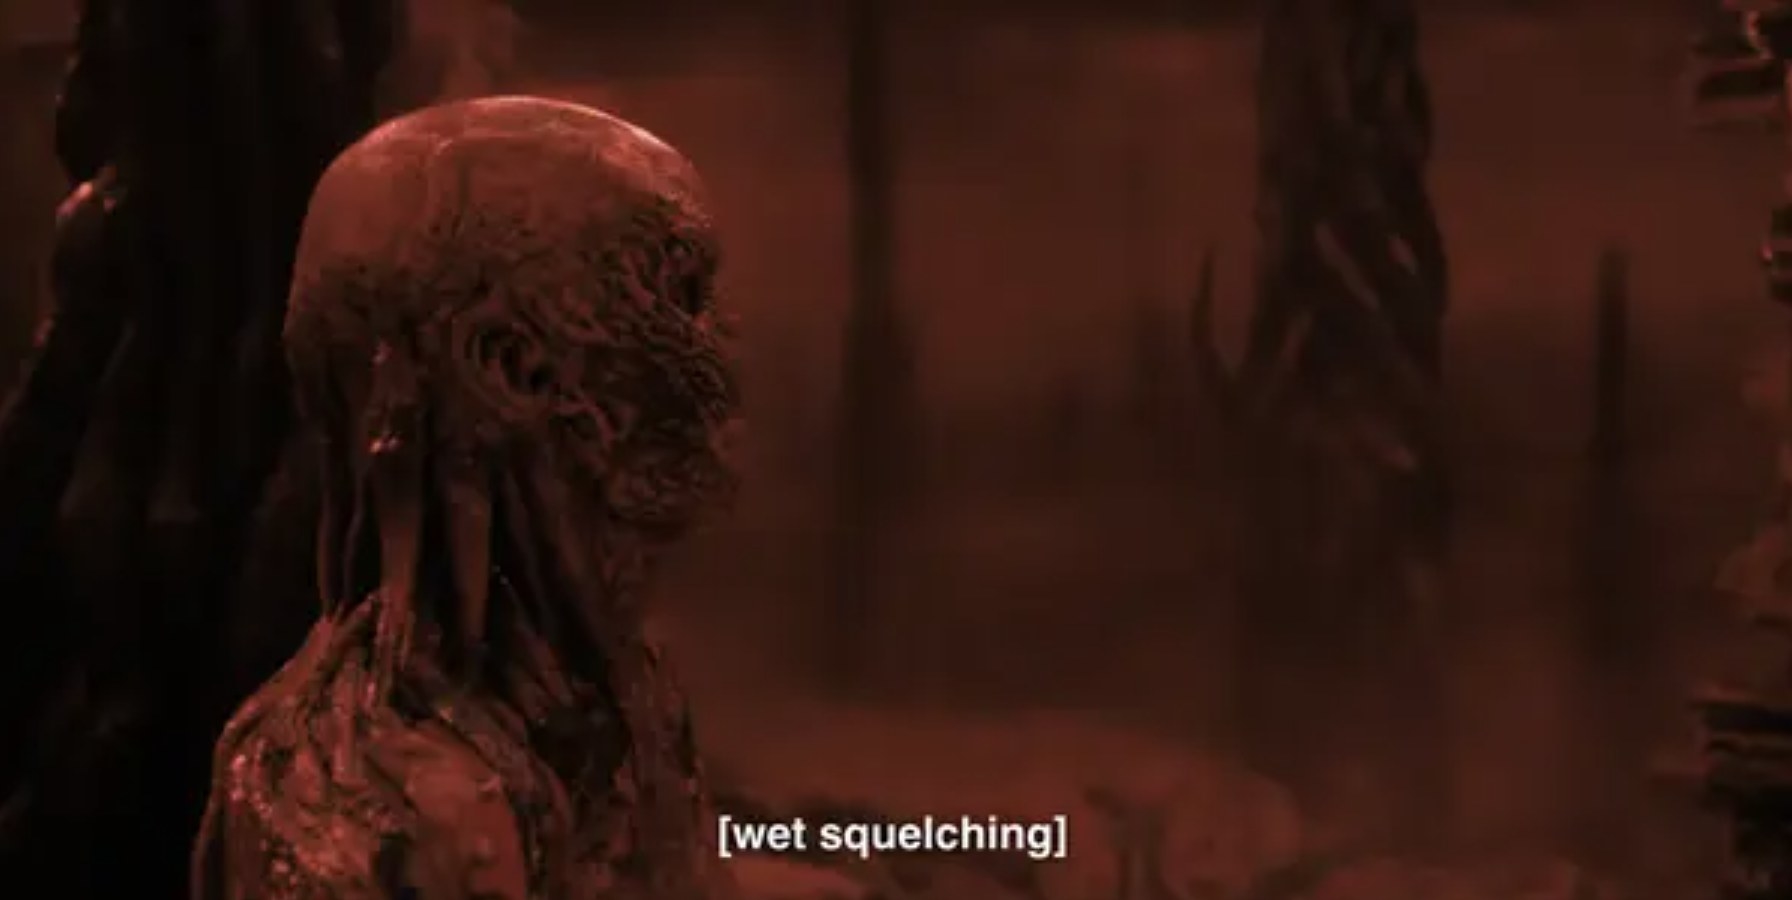 vecna squelching wetly on stranger thigns